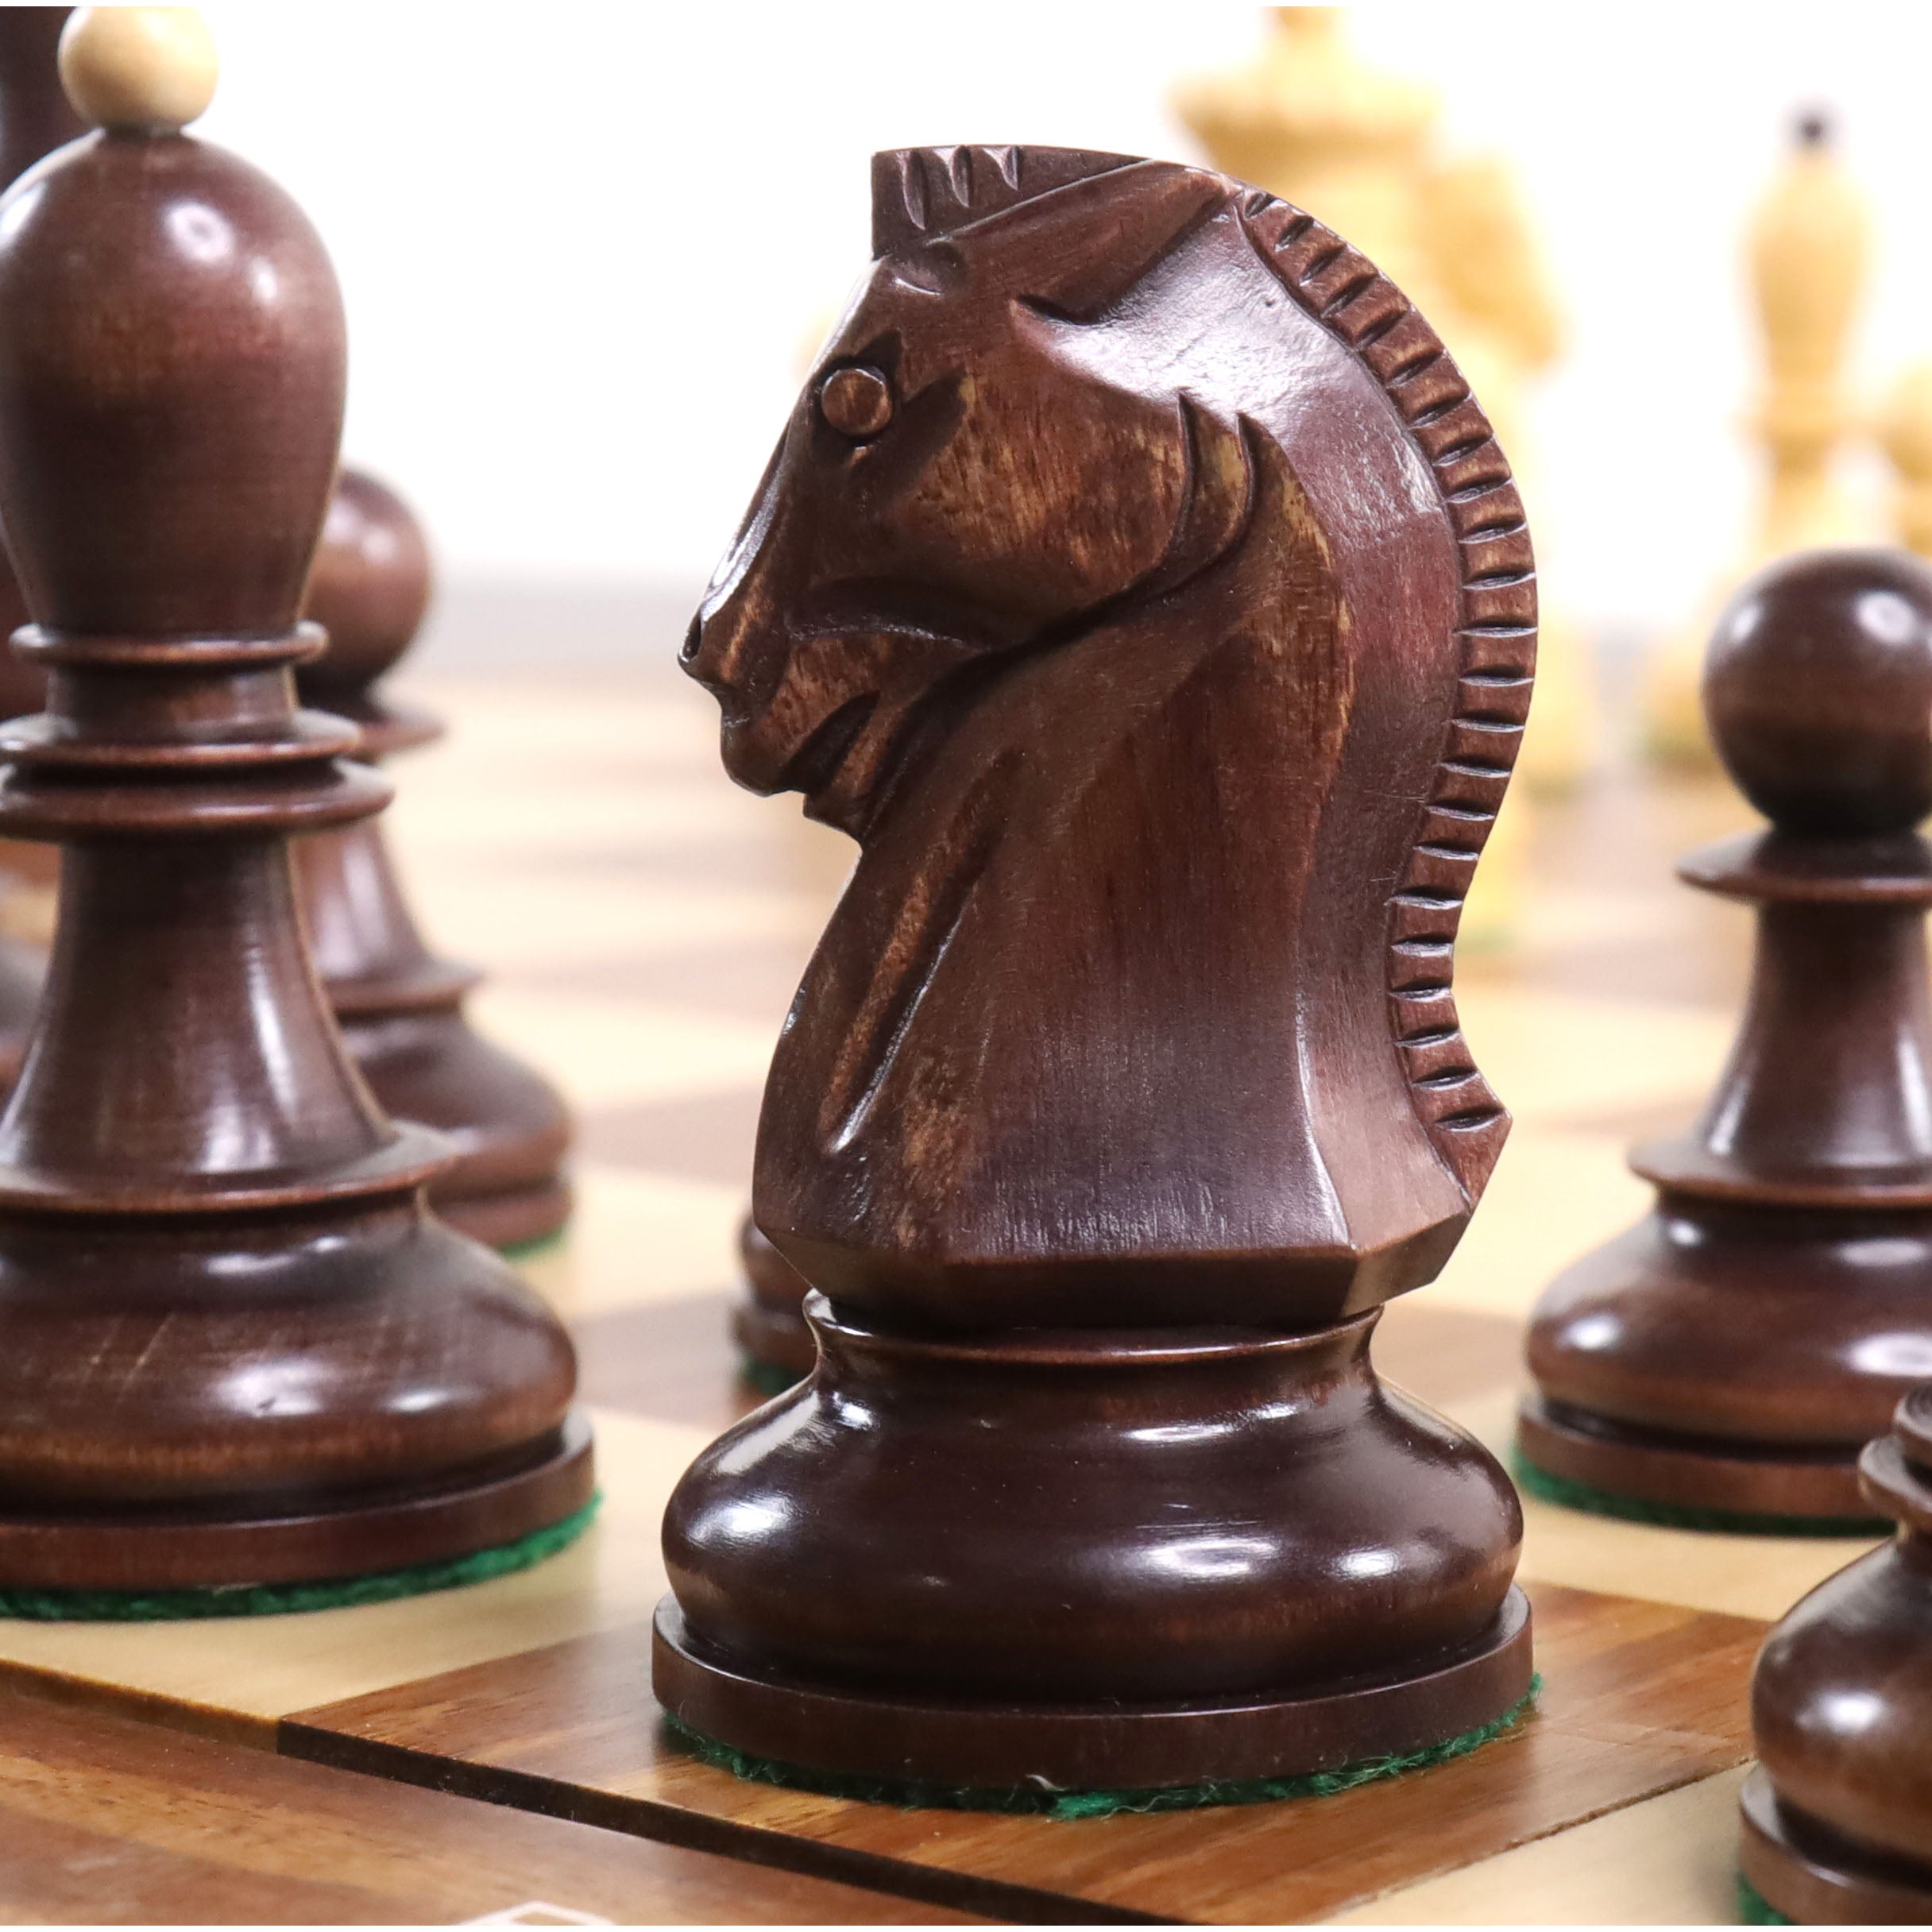 CLEARANCE SALE Mahogany Chess Board 16 Inches 